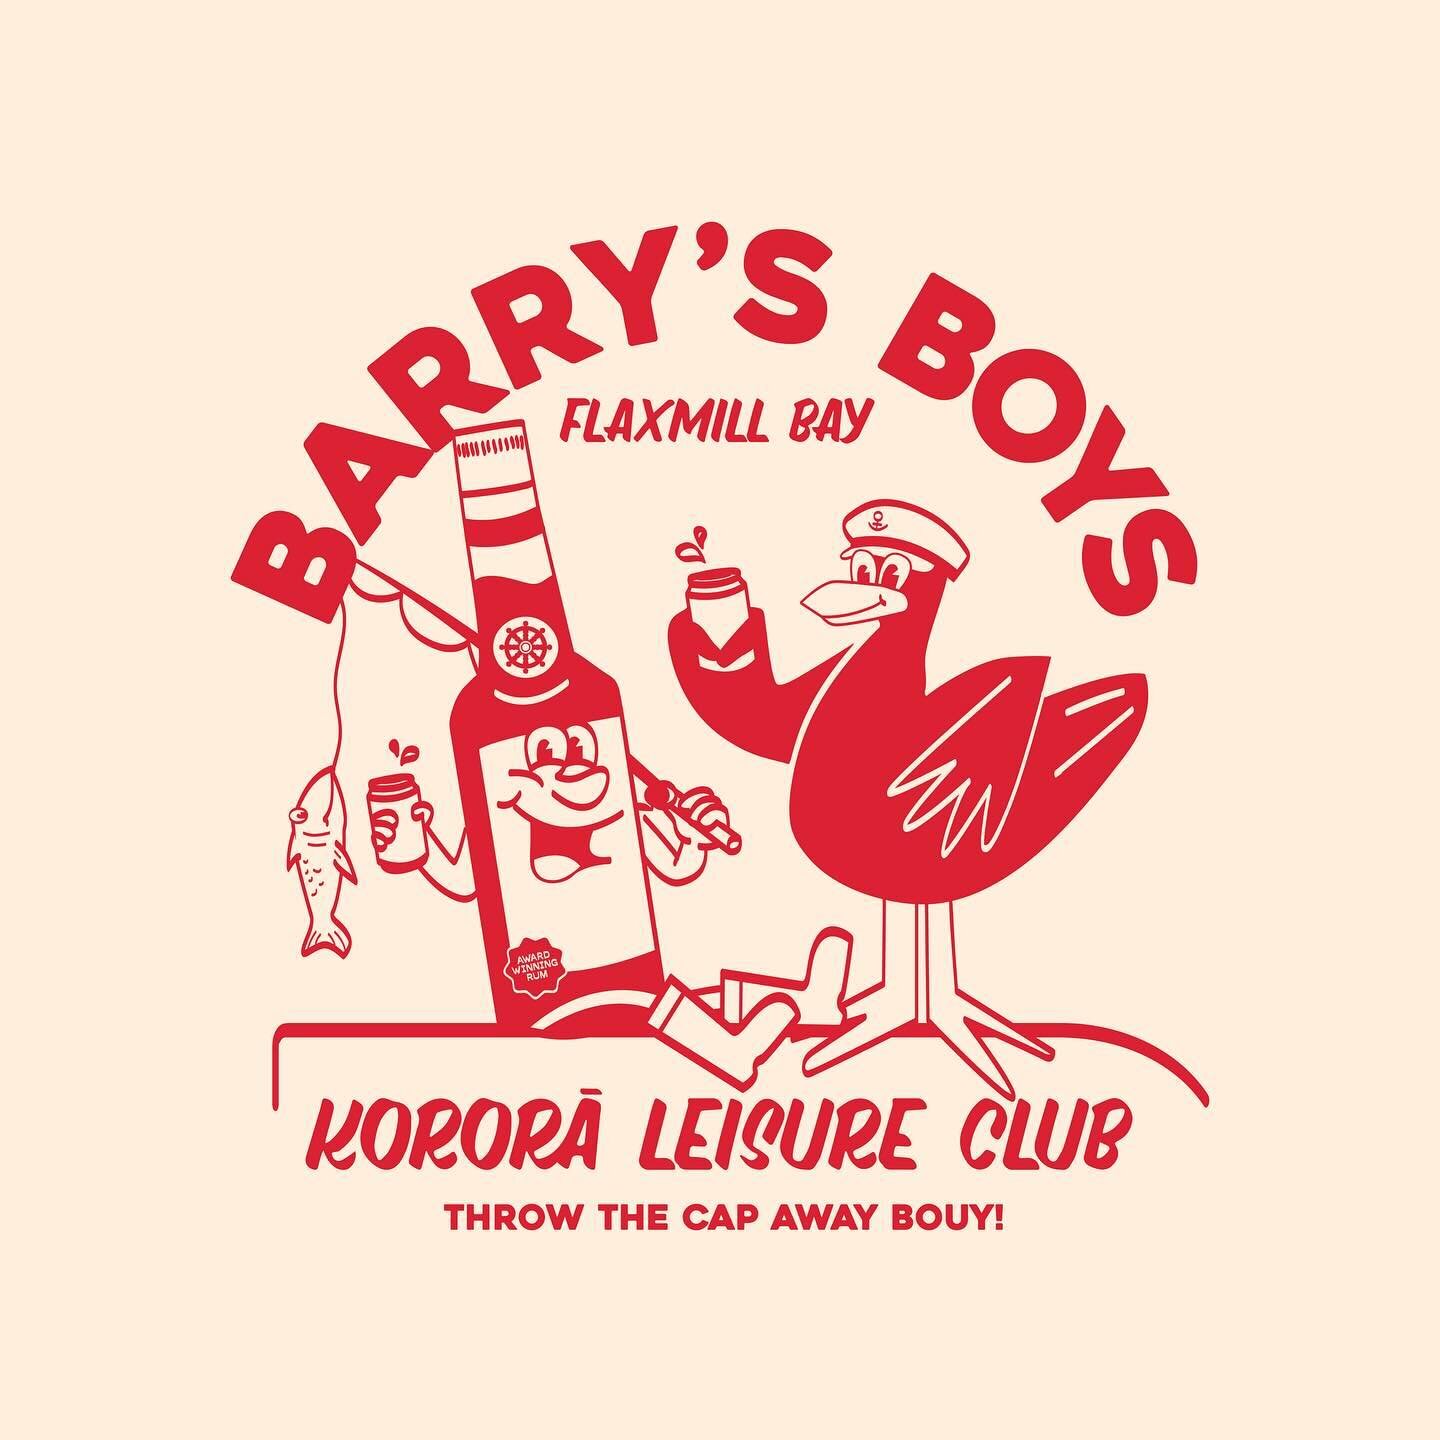 Meet Barry, the resident plastic blackbird aboard Kororā and more recently, the proud new mascot of the little blue vessel. 

The brief was simple: design a &lsquo;yacht&rsquo;-inspired graphic for a T-shirt. It was verryyy fun, given the complete cr